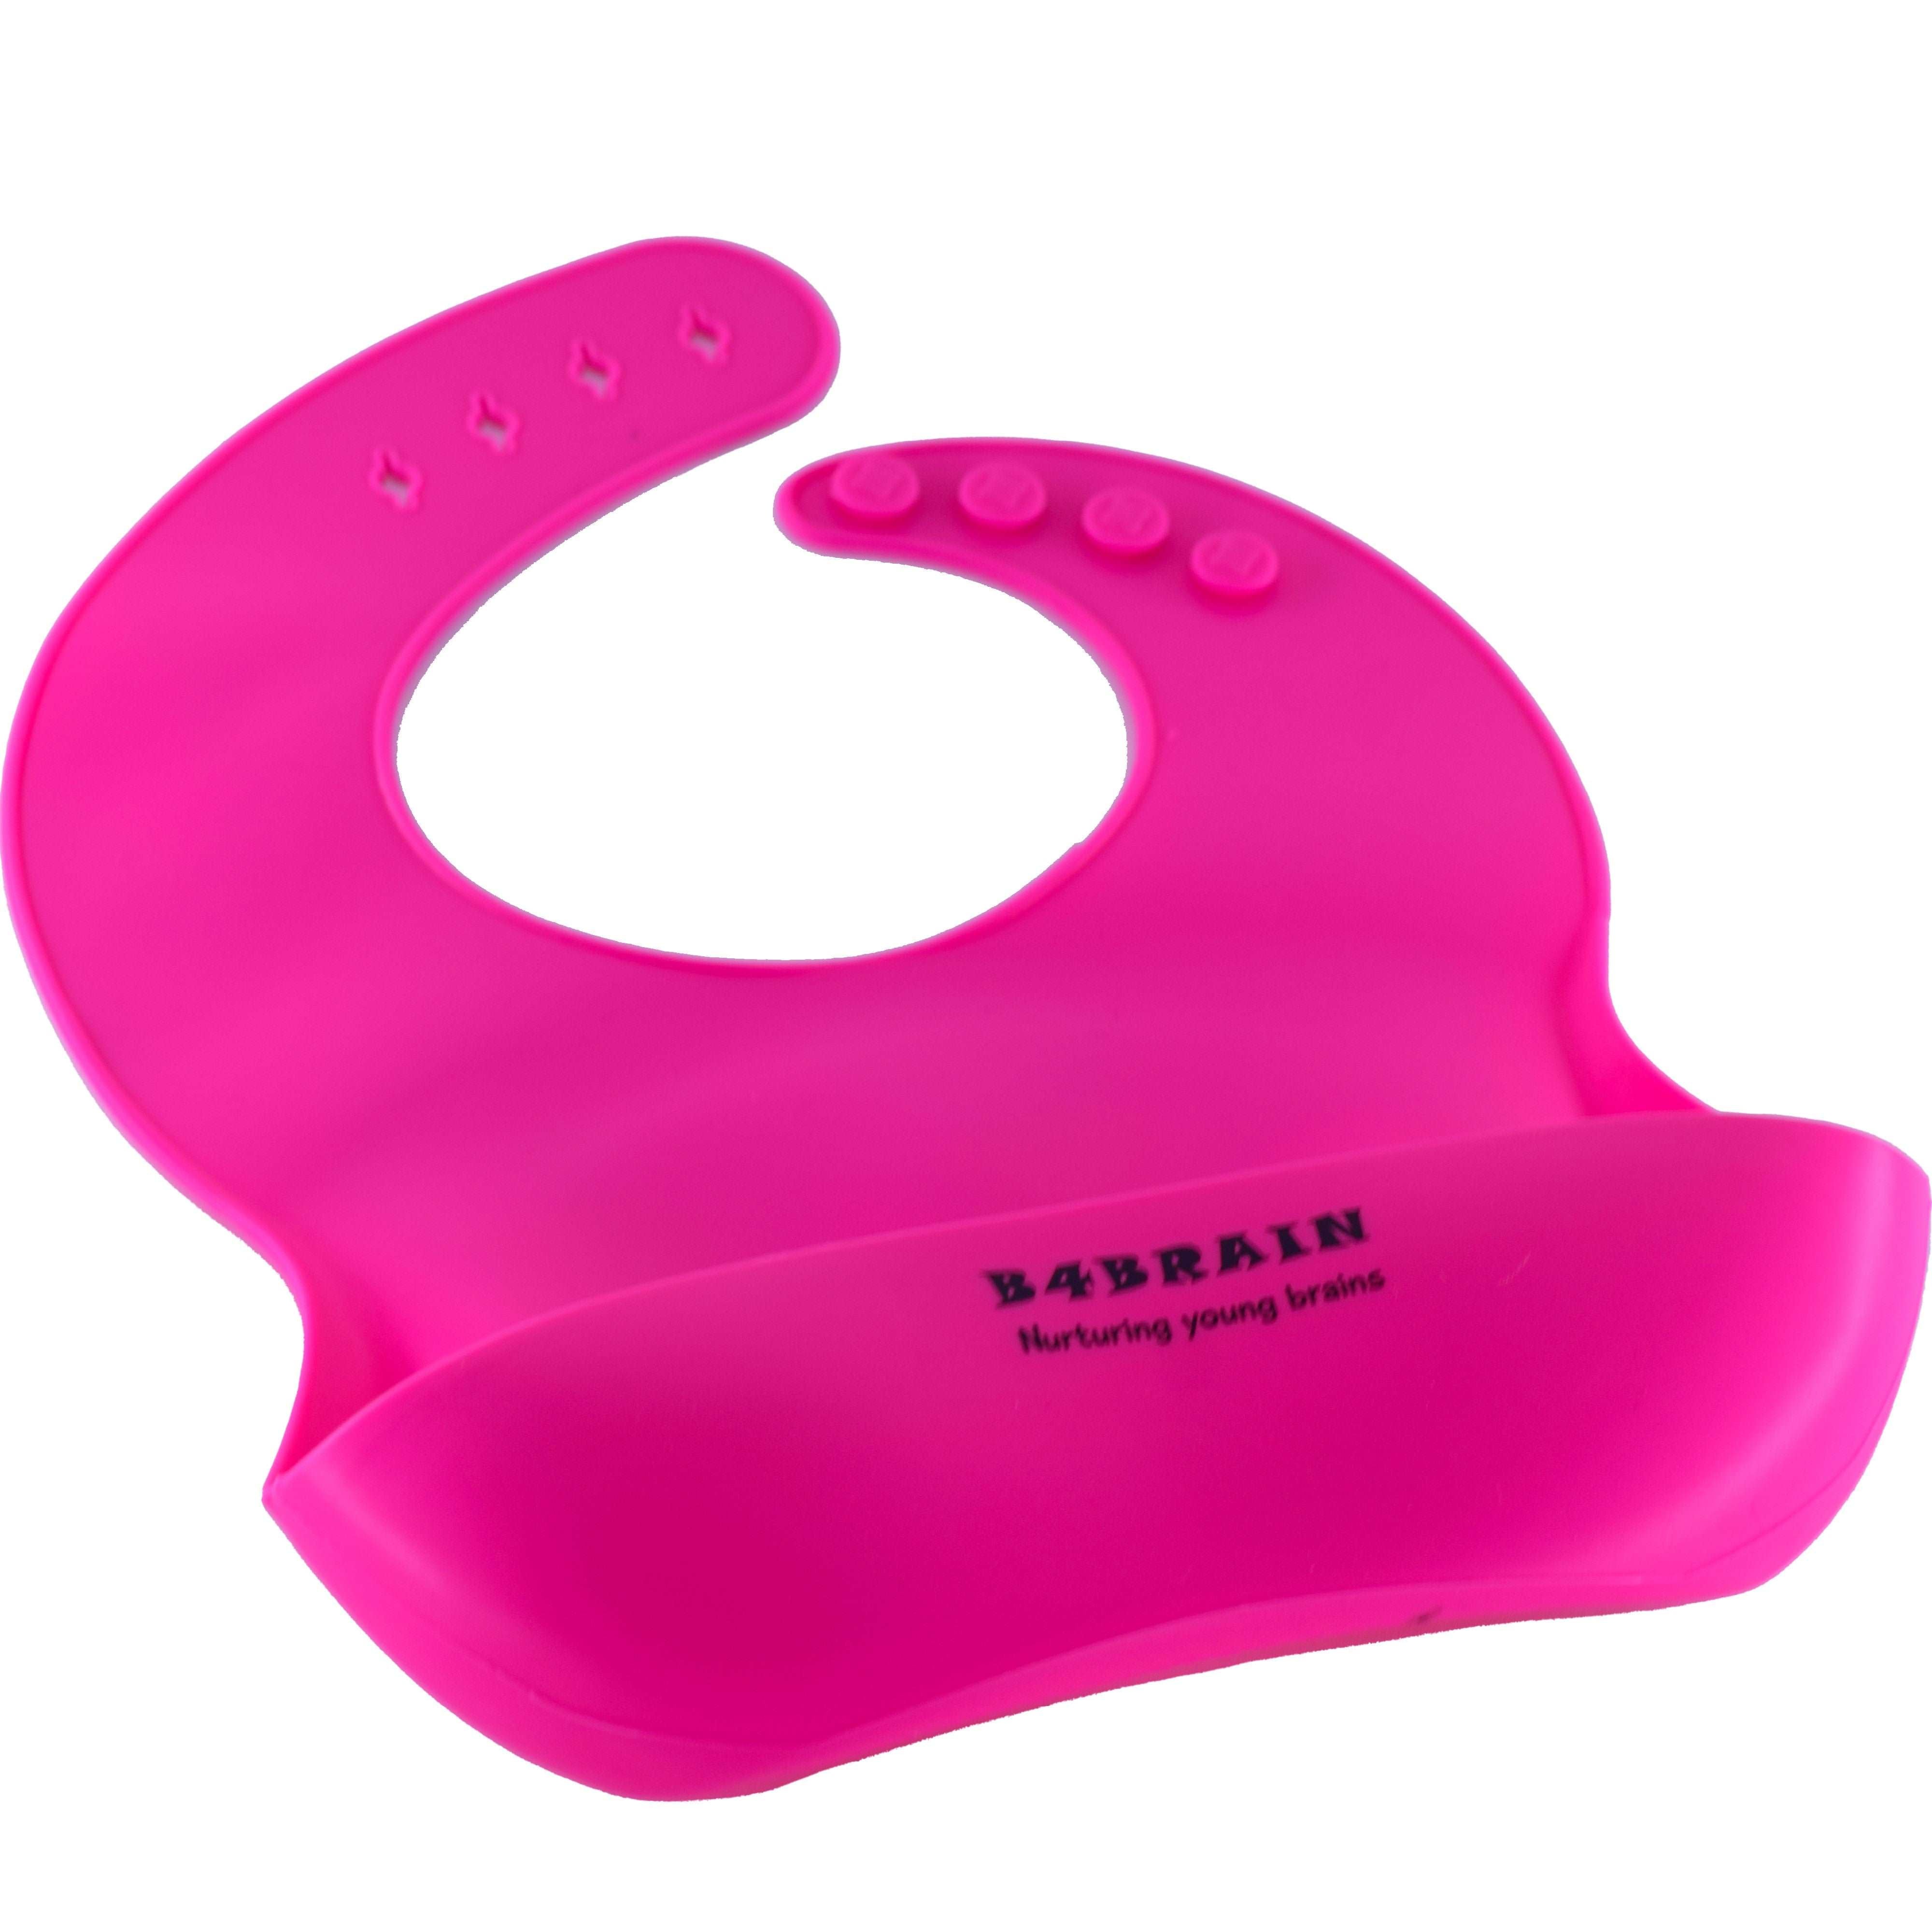 Help your little one learn to self-feed with the B4brain Baby Self Feeding Silicon Bib and Infant Self-Feeding Spoon. Soft, safe, and convenient